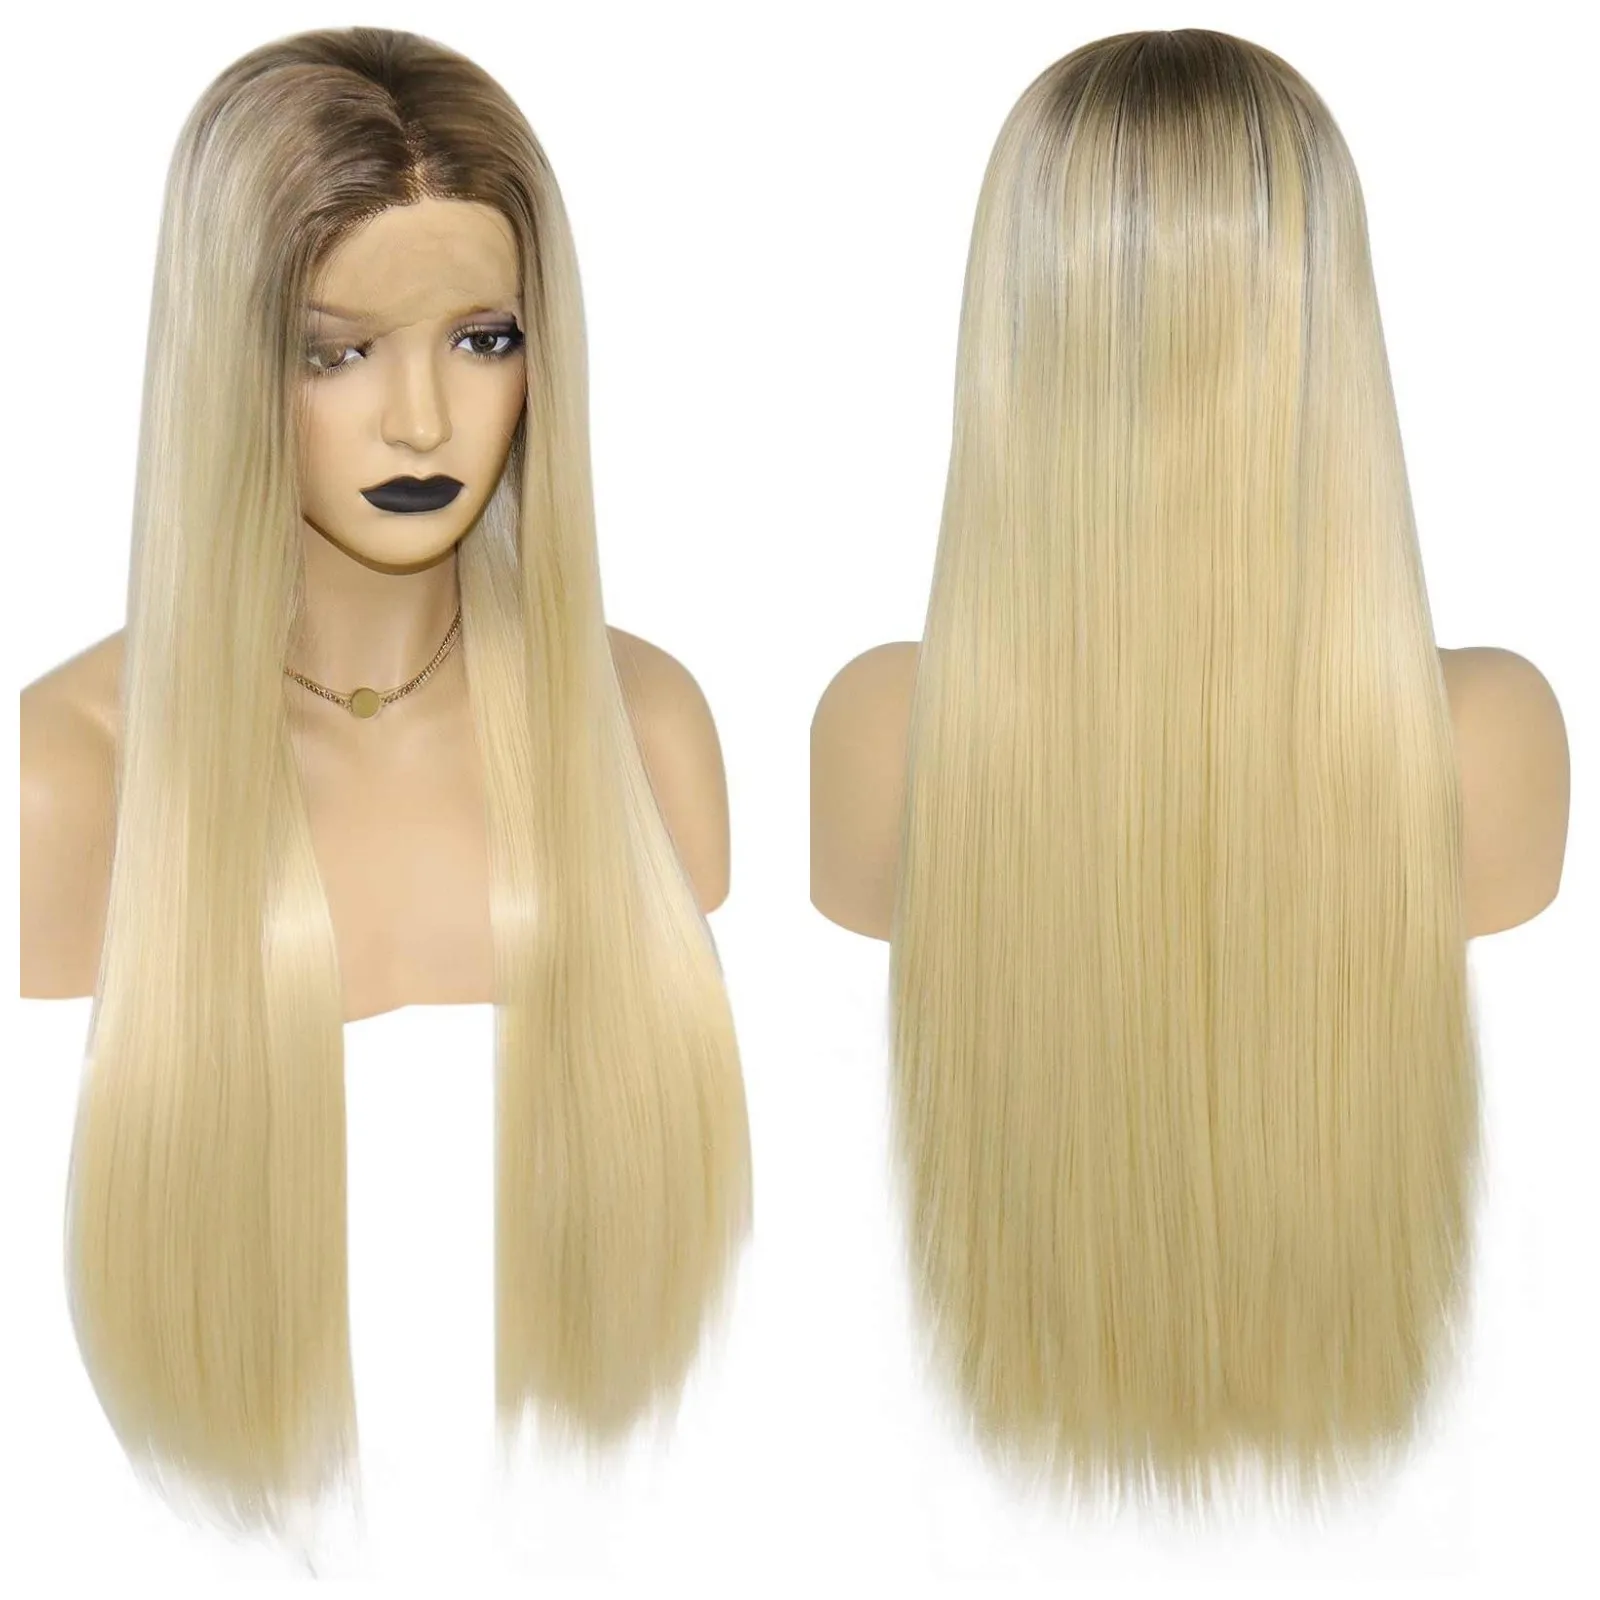 Anogol Synthetic Middle Part 13*1T Part Lace Wigs Heat Resistant Fiber Ombre Blonde Long Straight Hair For Black Women